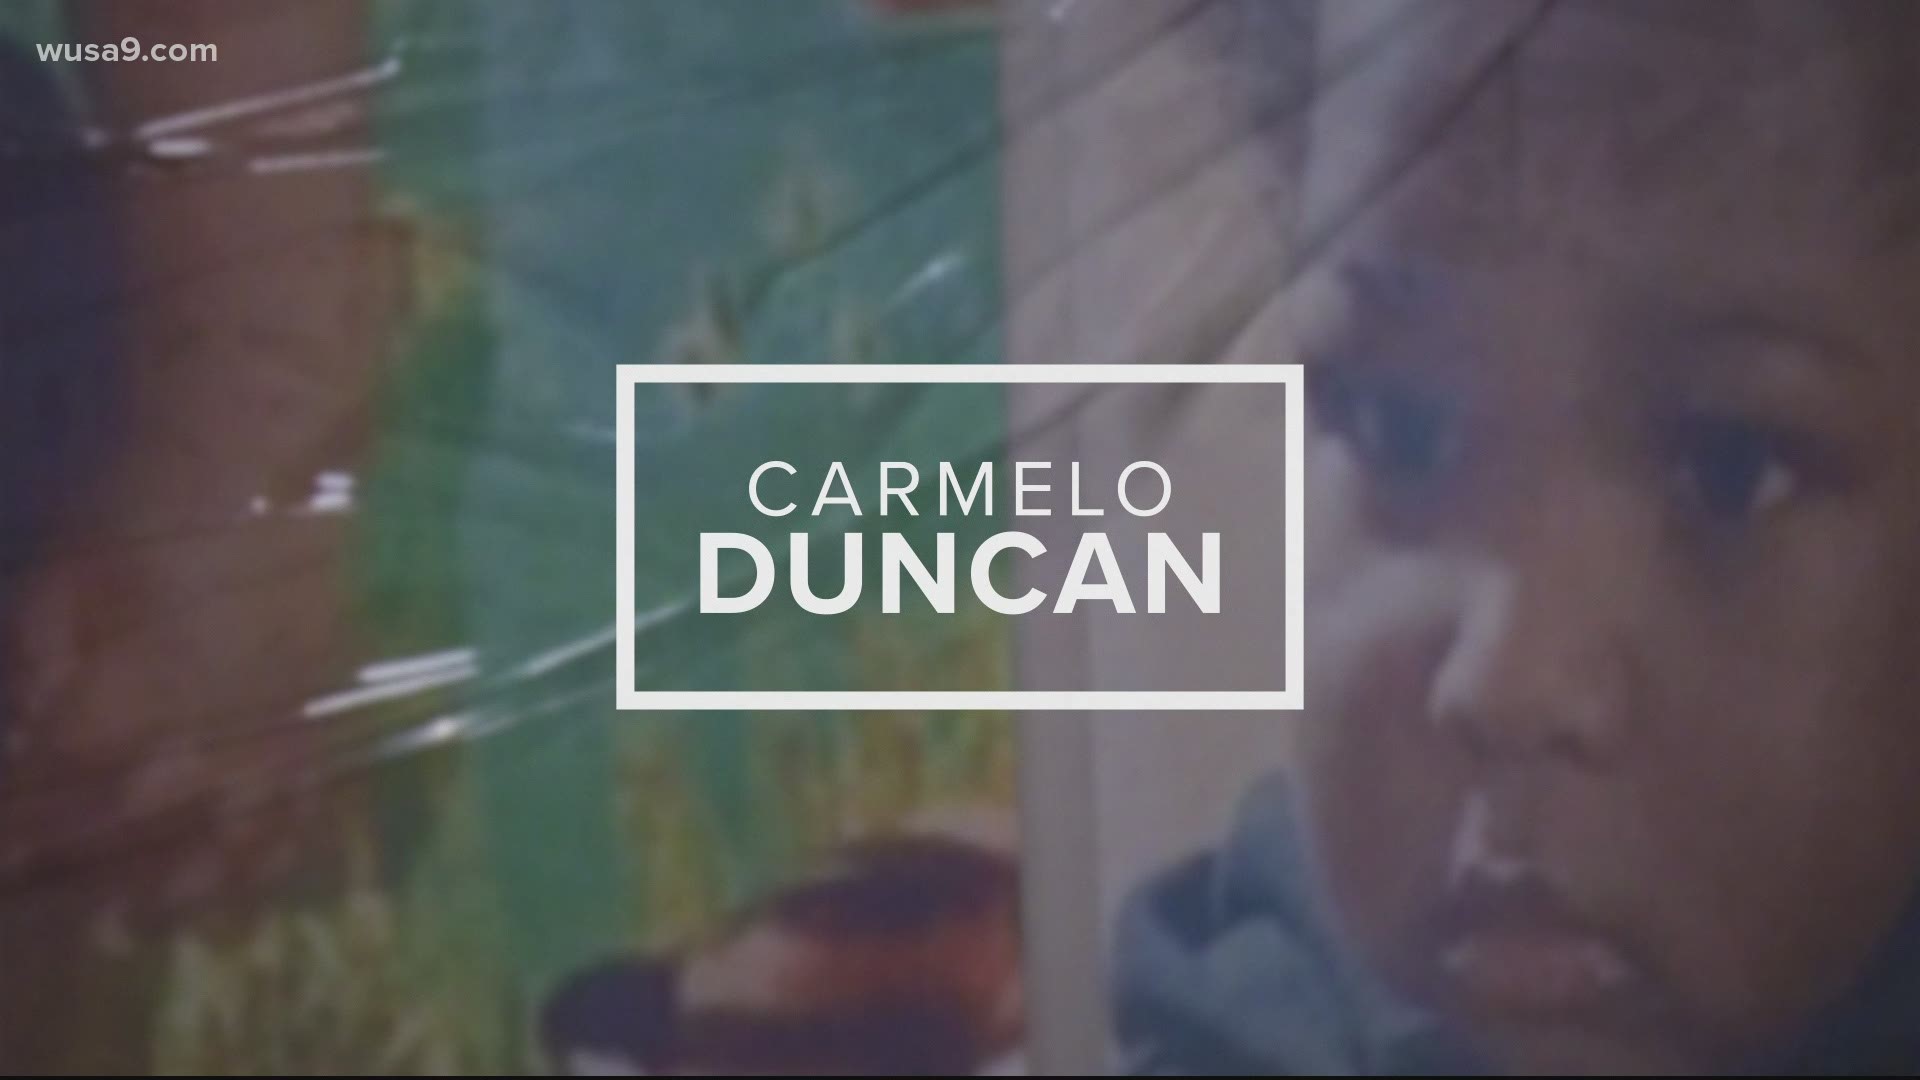 Duncan died from injuries sustained in the shooting while sitting in his father’s car on December 2.